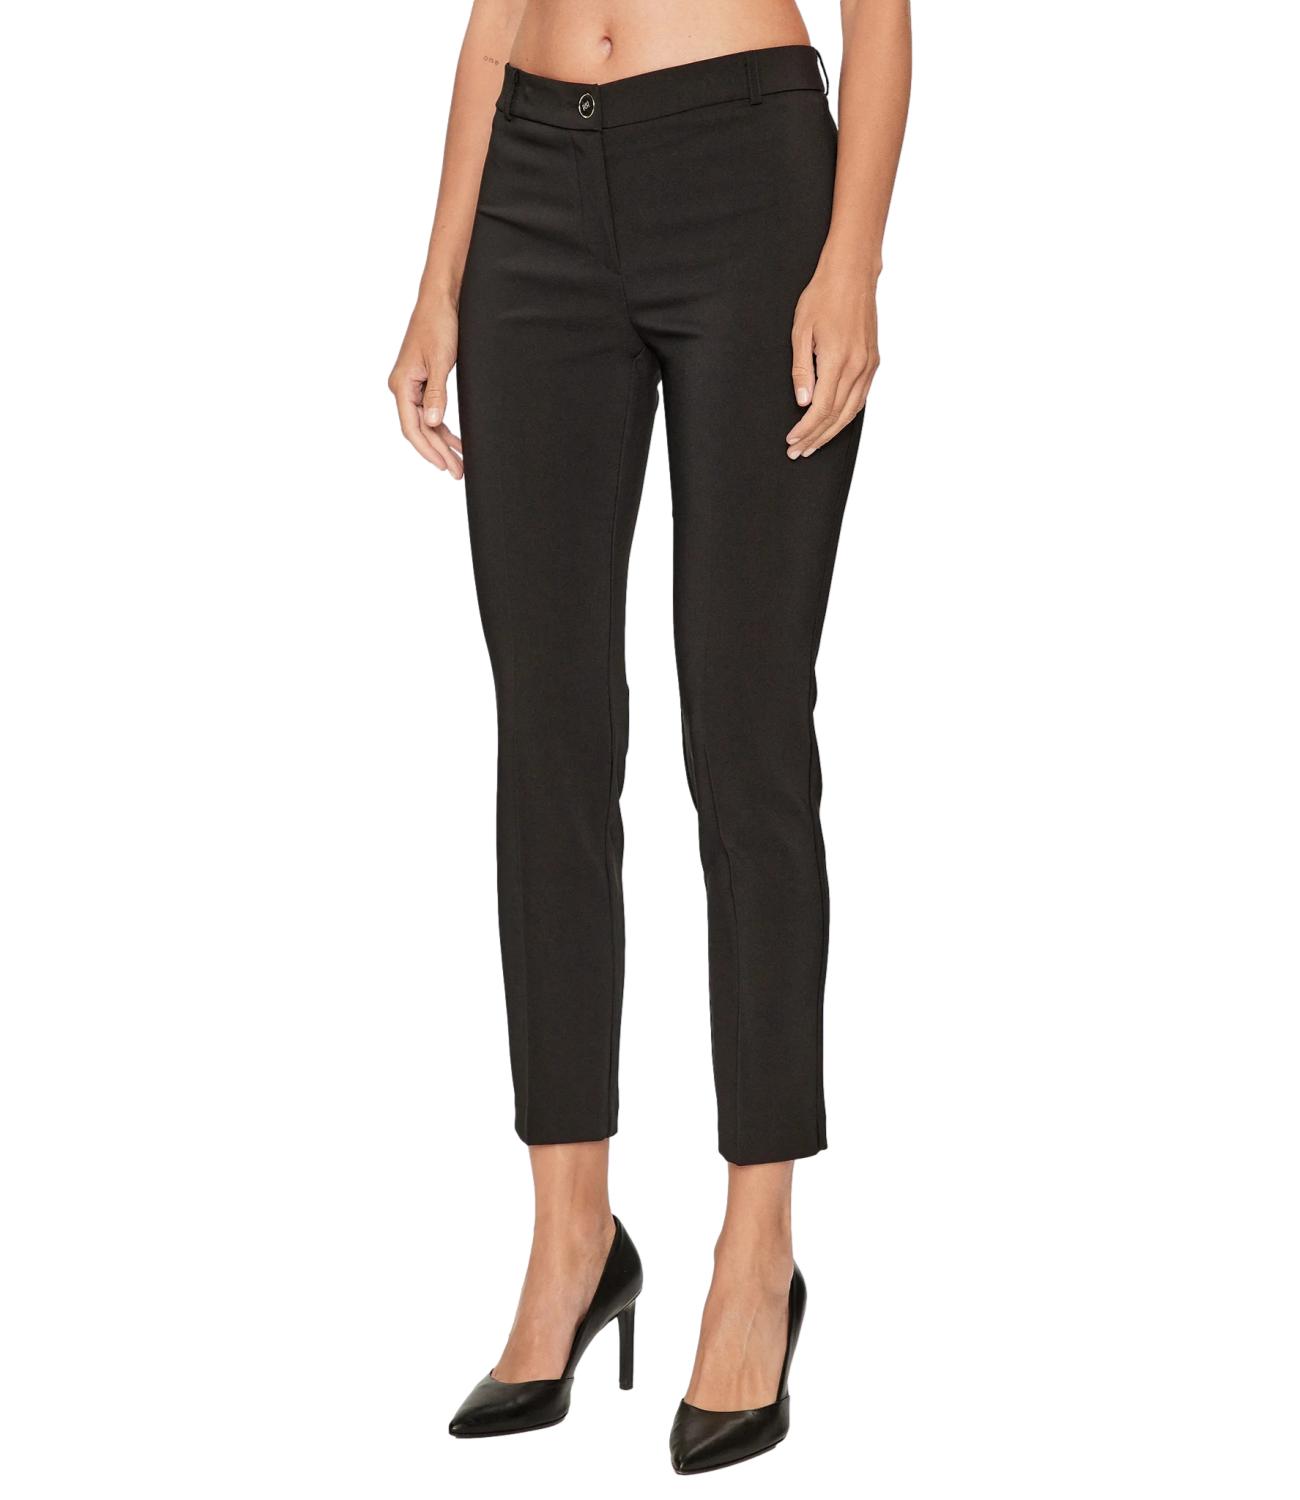 RINASCAMENTO Black slim fit trousers for women